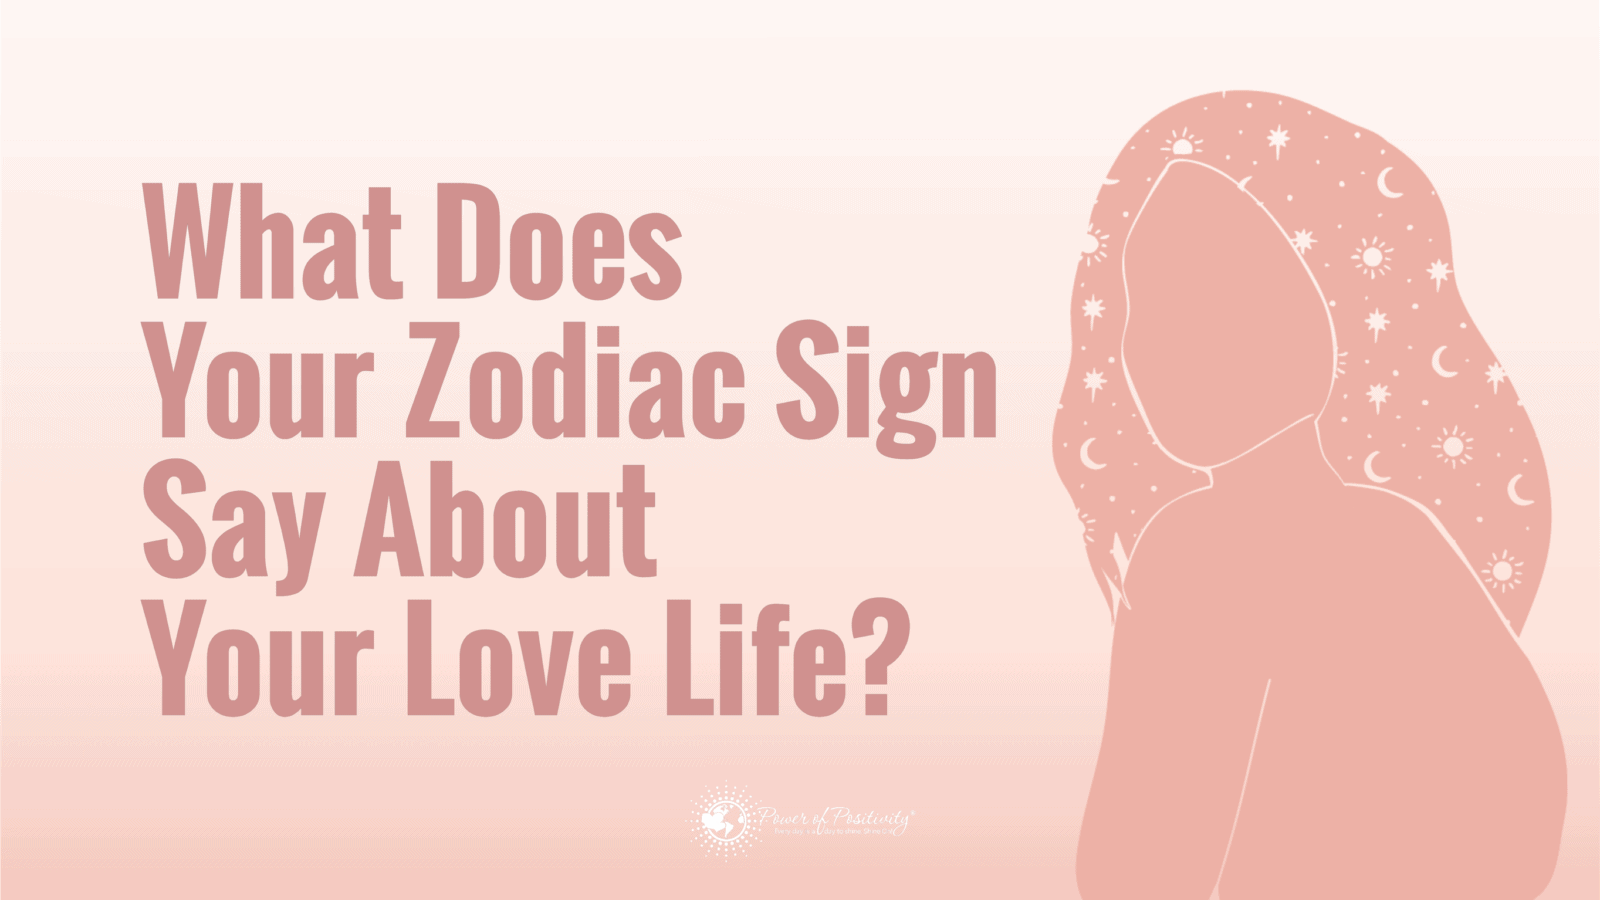 What Does Your Zodiac Sign Say About Your Love Life?